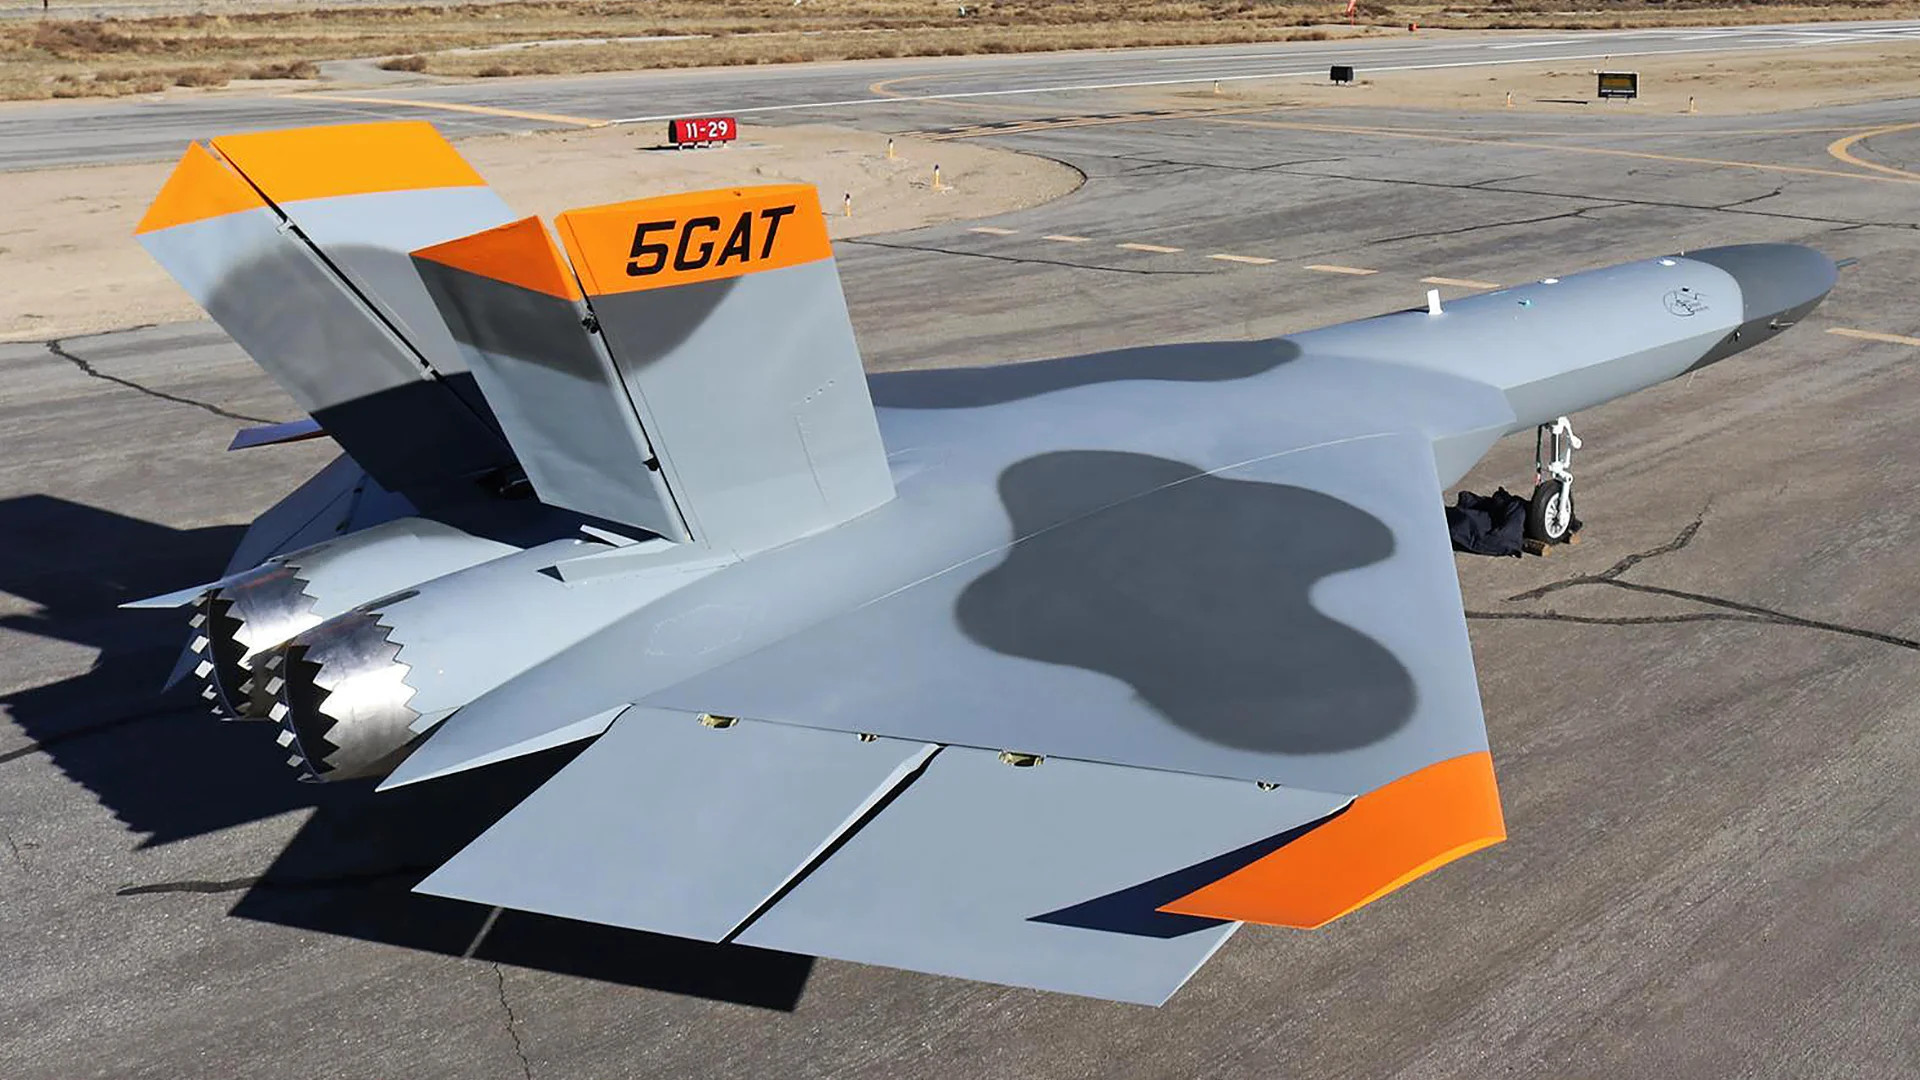 Drone That Mimics Enemy Stealth Fighters Ordered By DoD